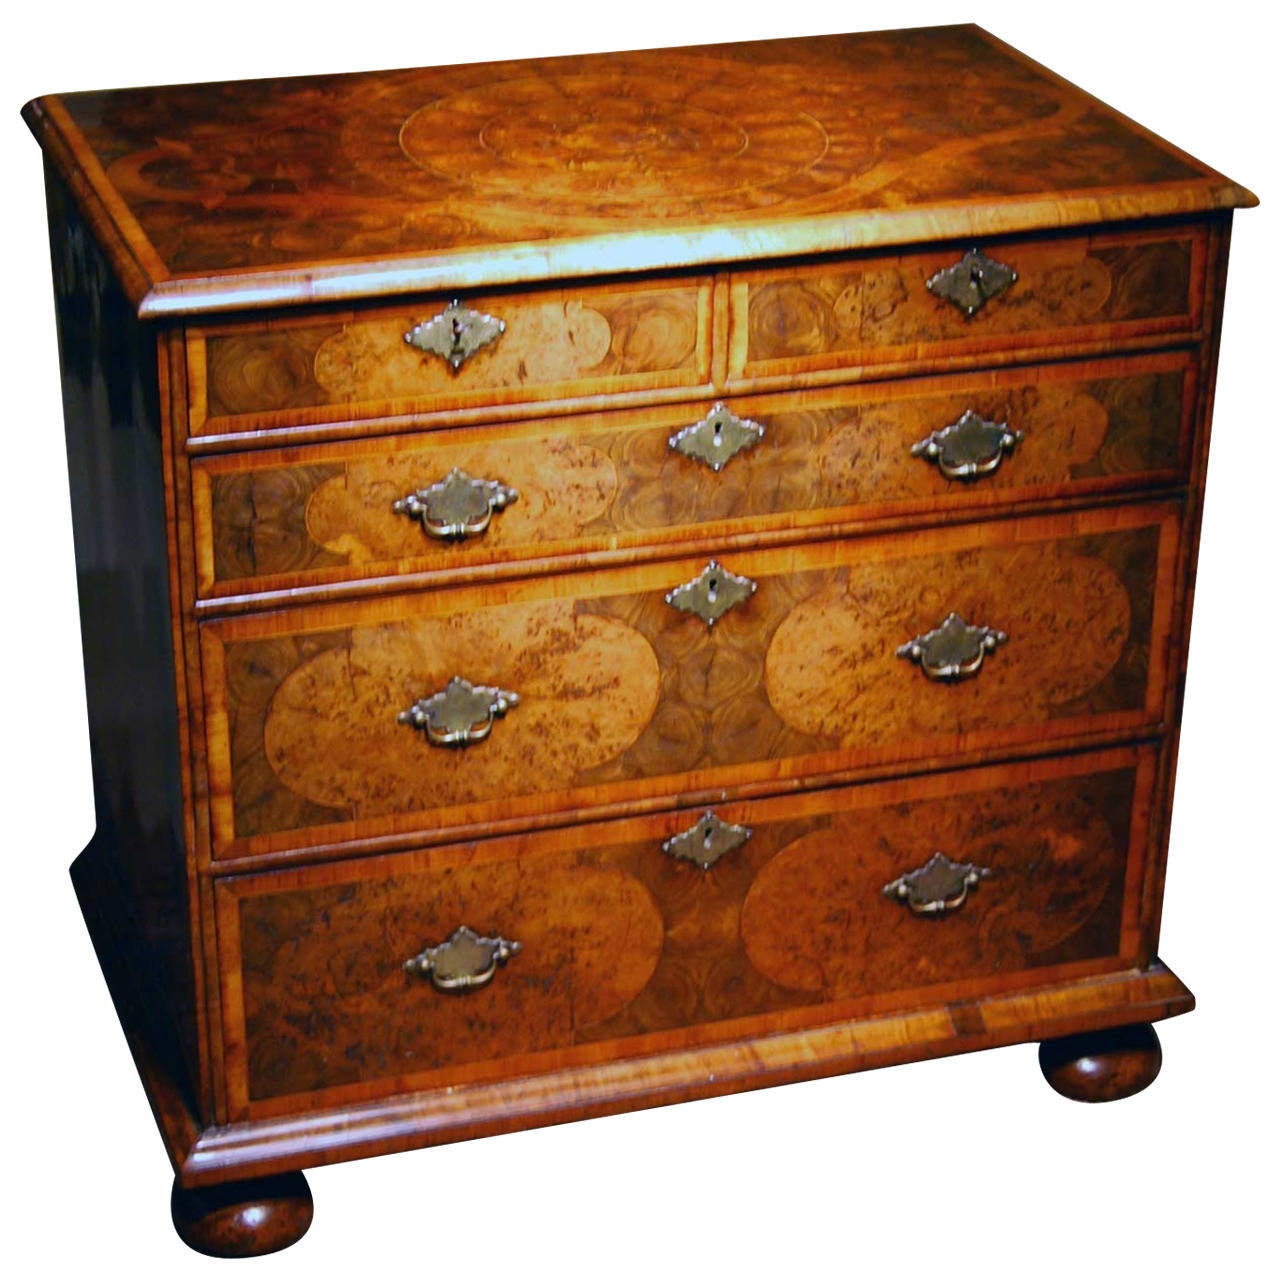 A very good William and Mary period oyster veneered olivewood chest of drawers, the top with a four lobed central reserve of oyster veneers crossbanded with walnut and a semi ovulo moulded edge, the sides with concave cornered bandings and central